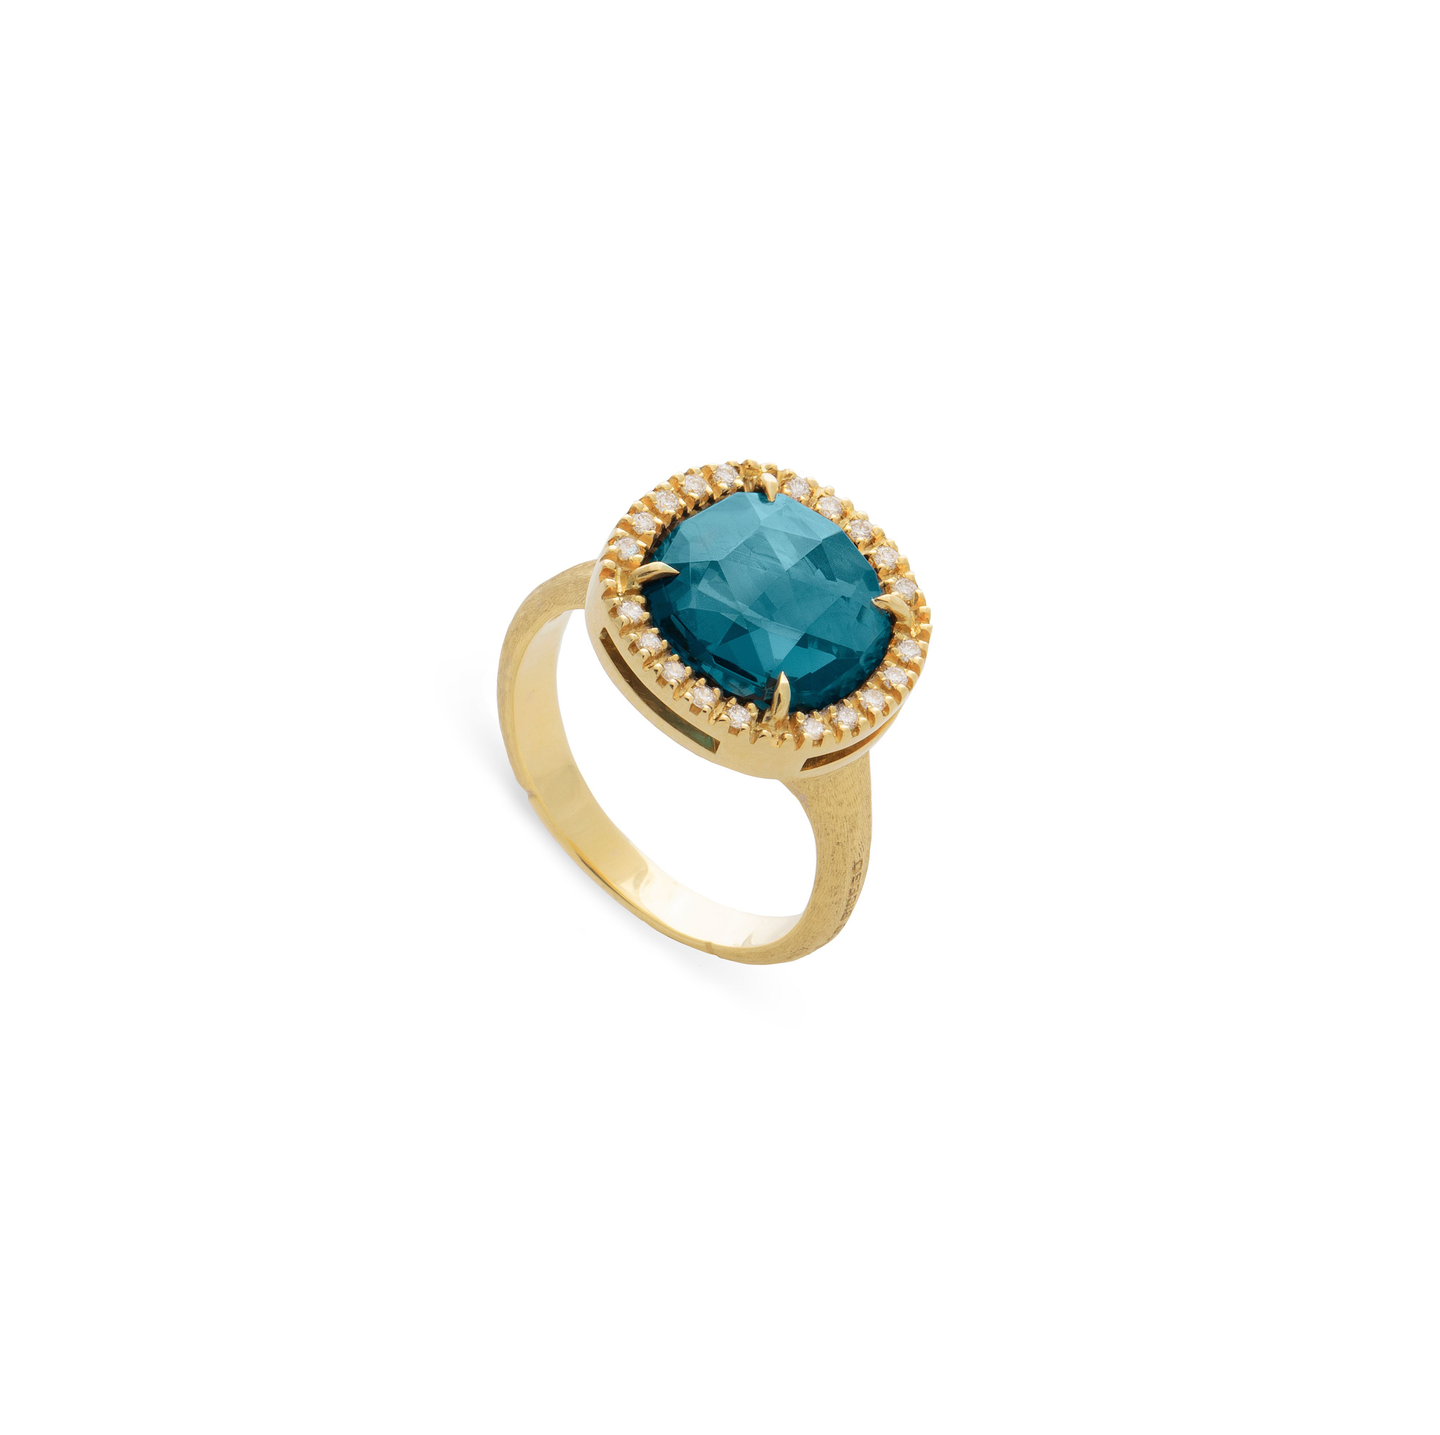 Marco Bicego Jaipur London Blue Topaz and Diamond Cocktail Ring